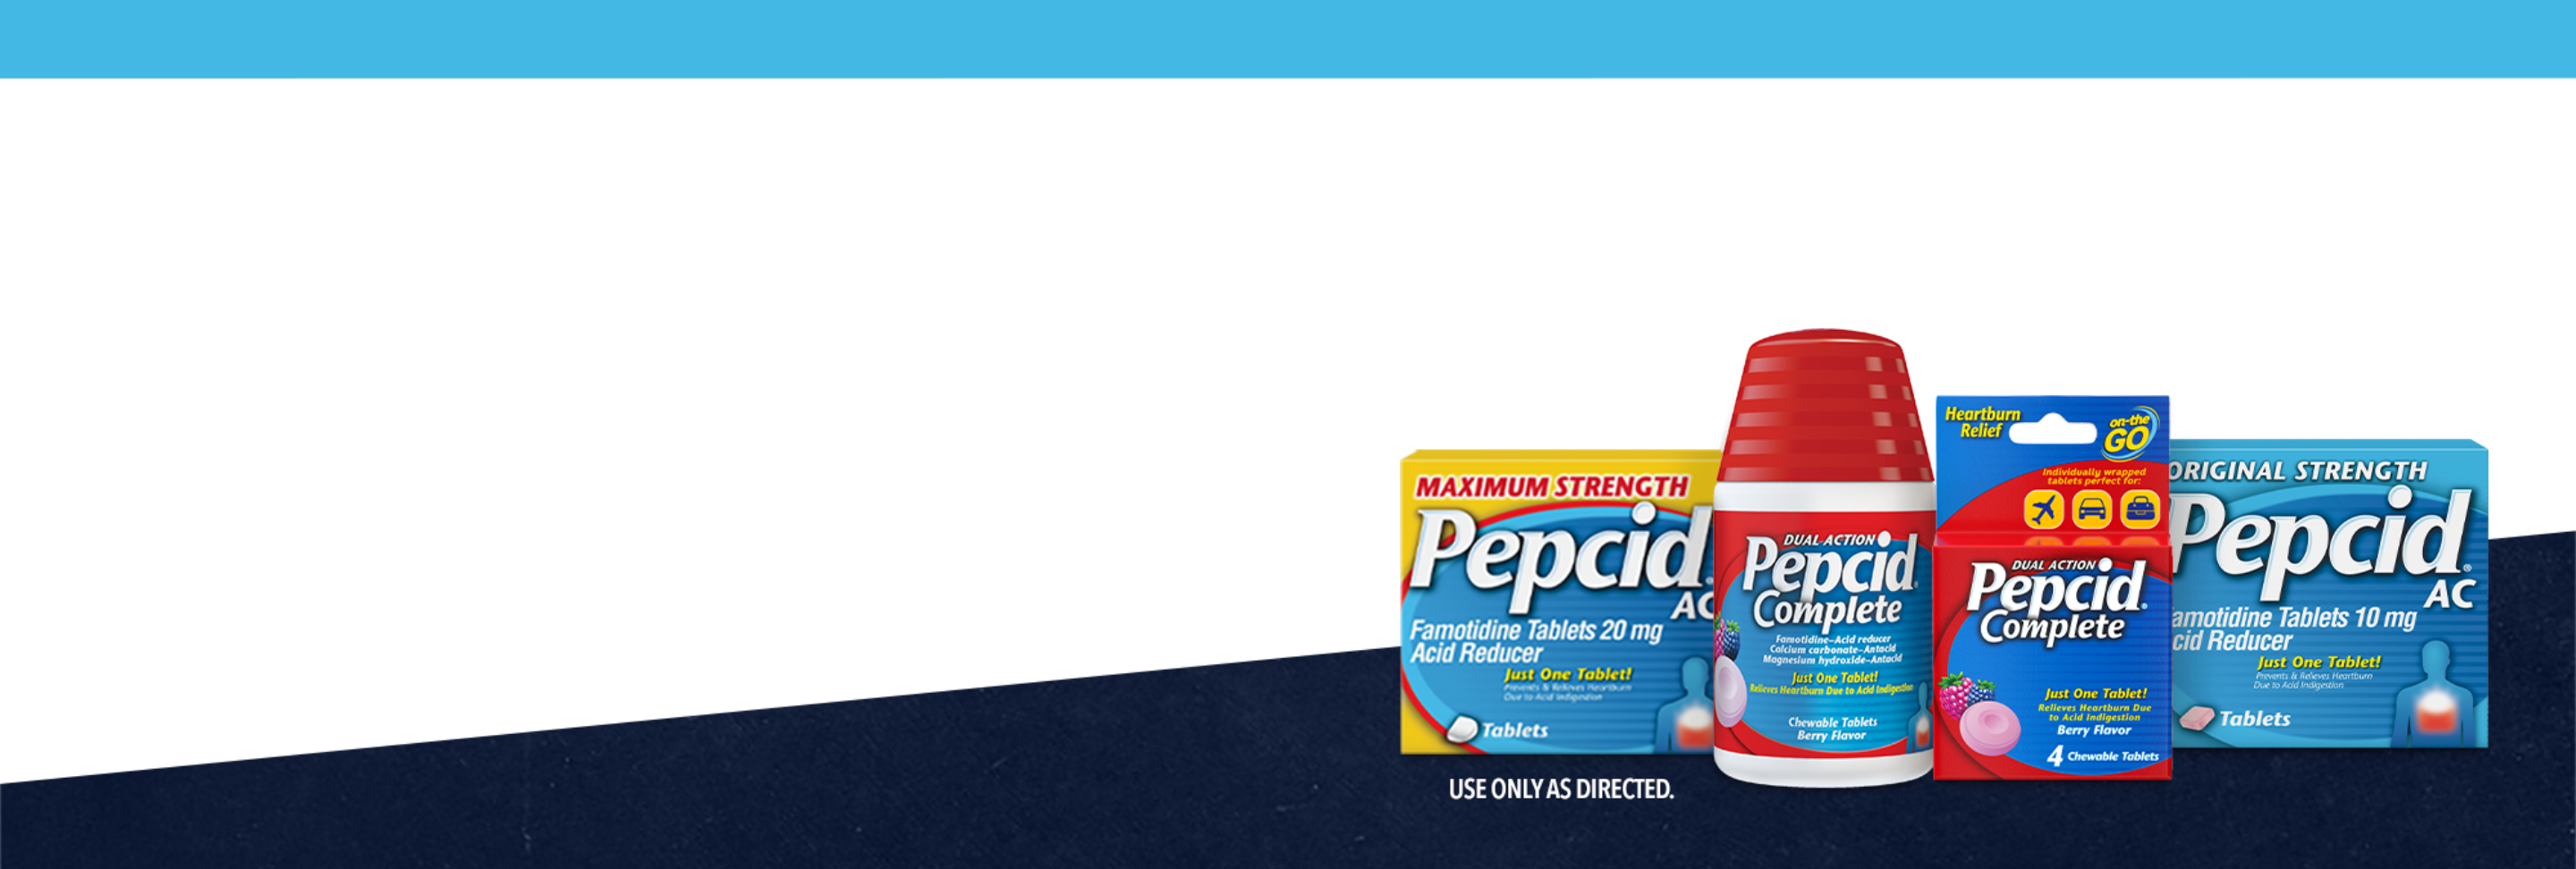 Line of Pepcid® heartburn relief and acid reducer products